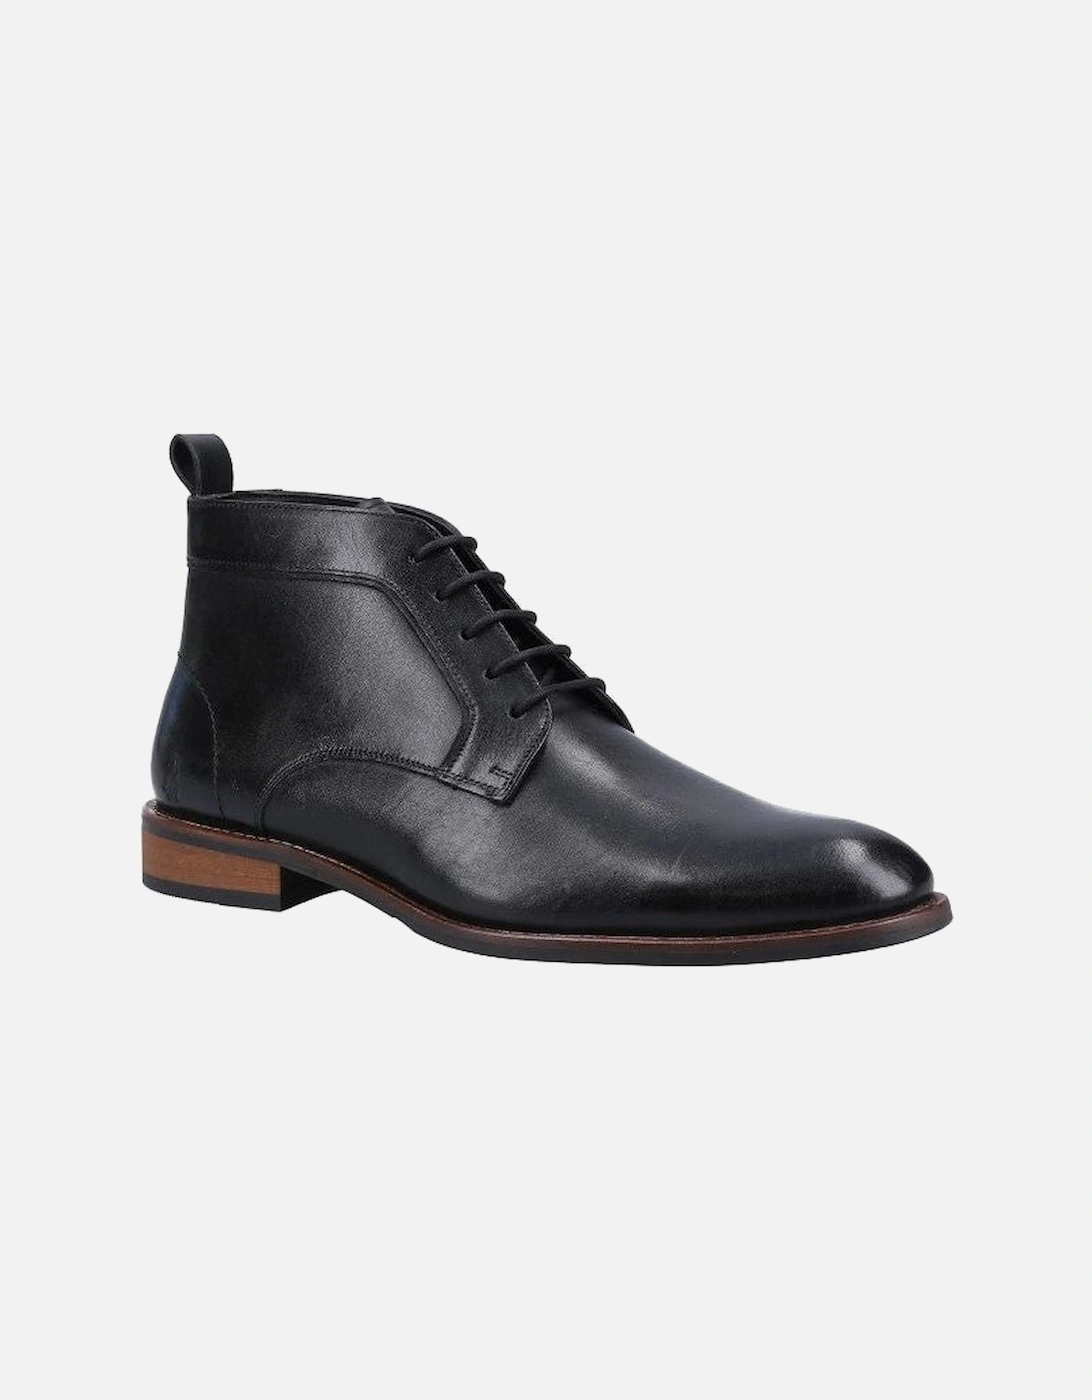 Declan Lace up boot in Black leather, 2 of 1